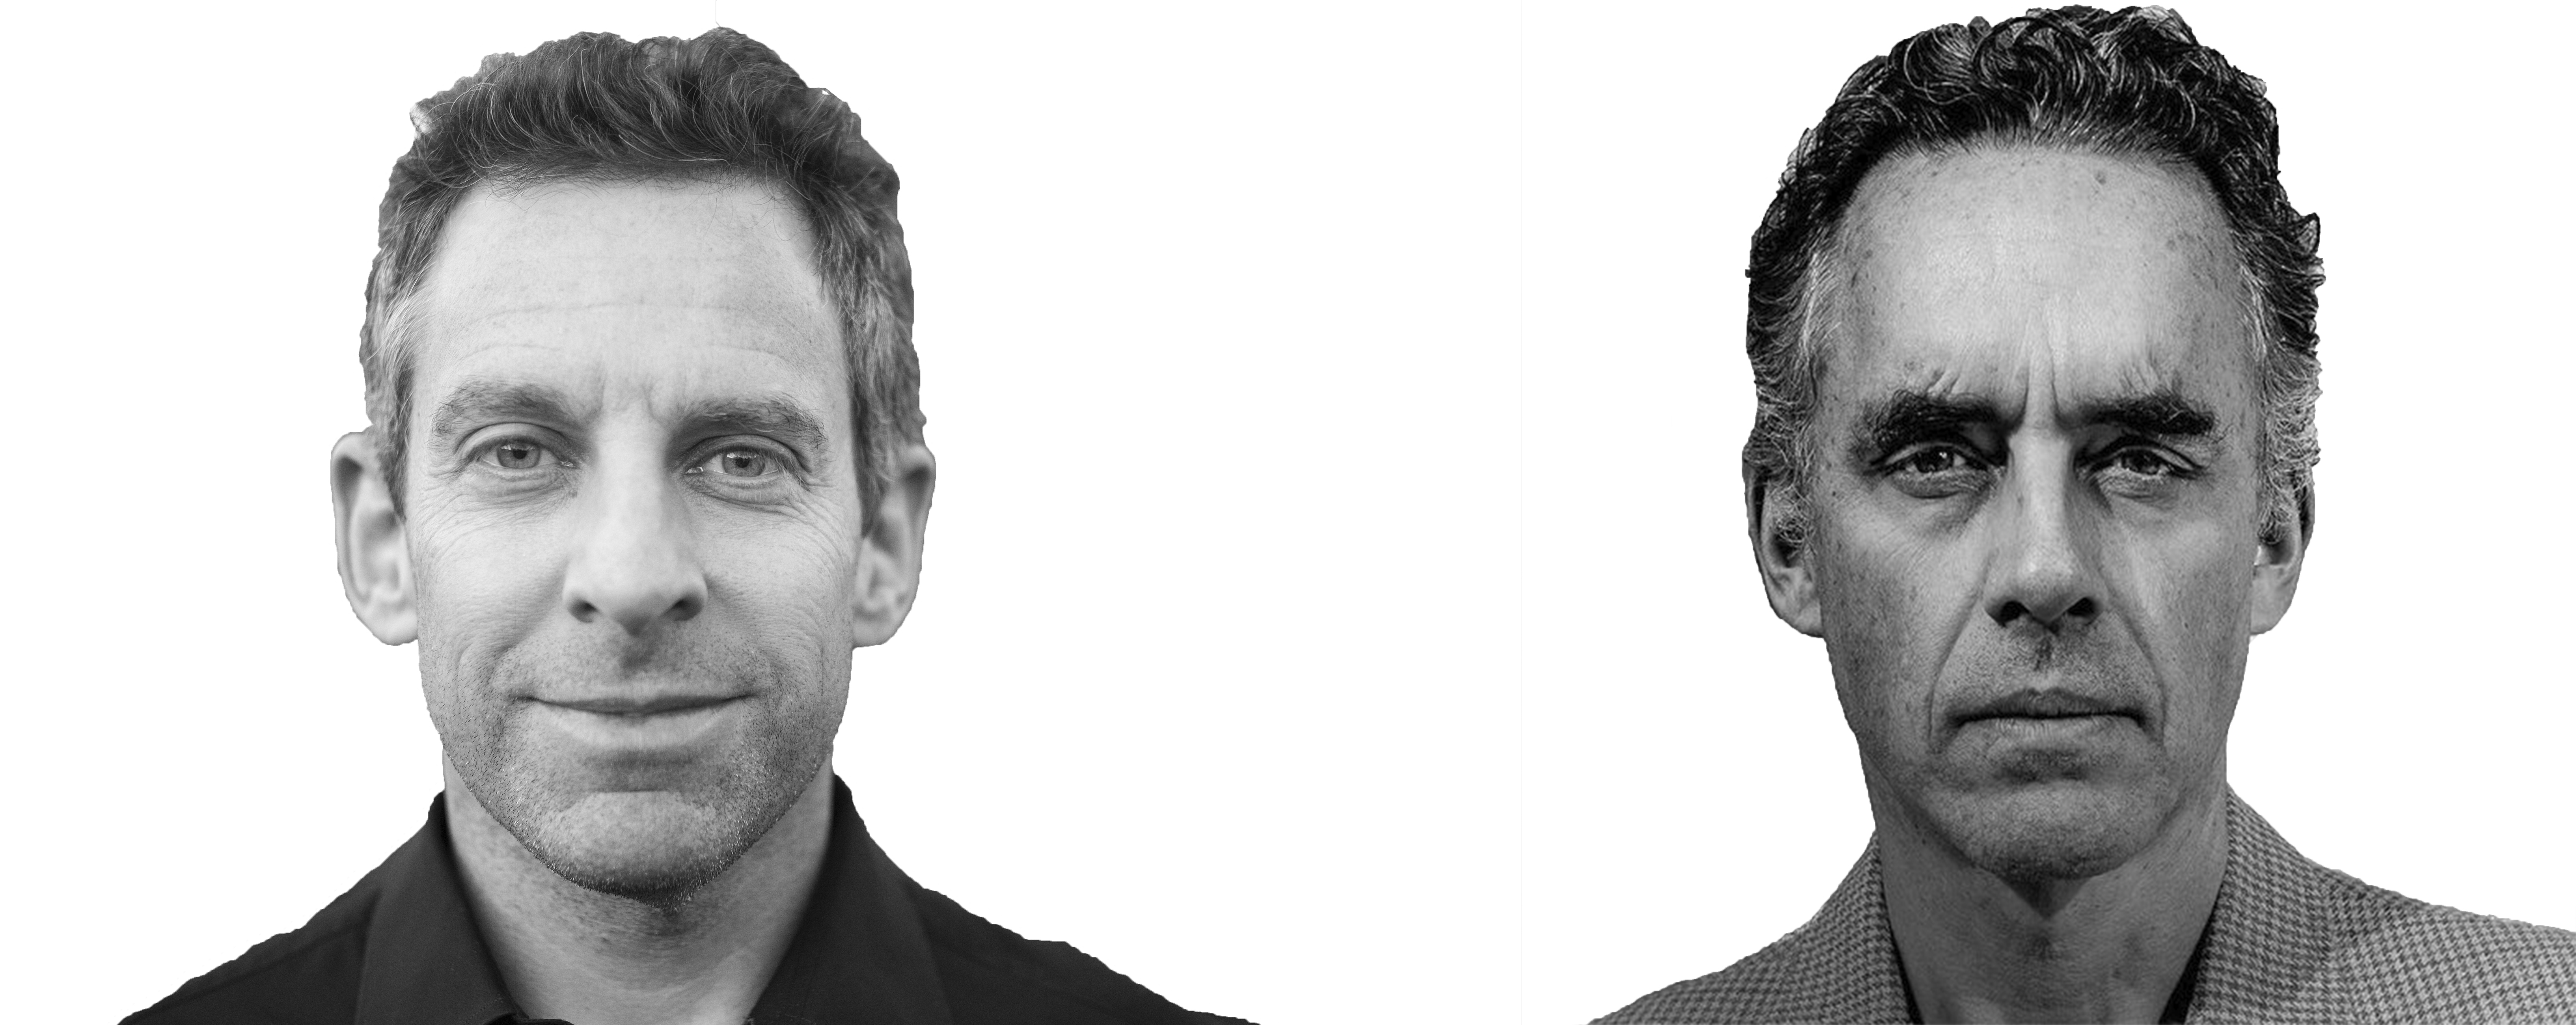 Sam Harris and Jordan Peterson a lot of time, then God for 20 minutes | Canada's National Observer: & Analysis